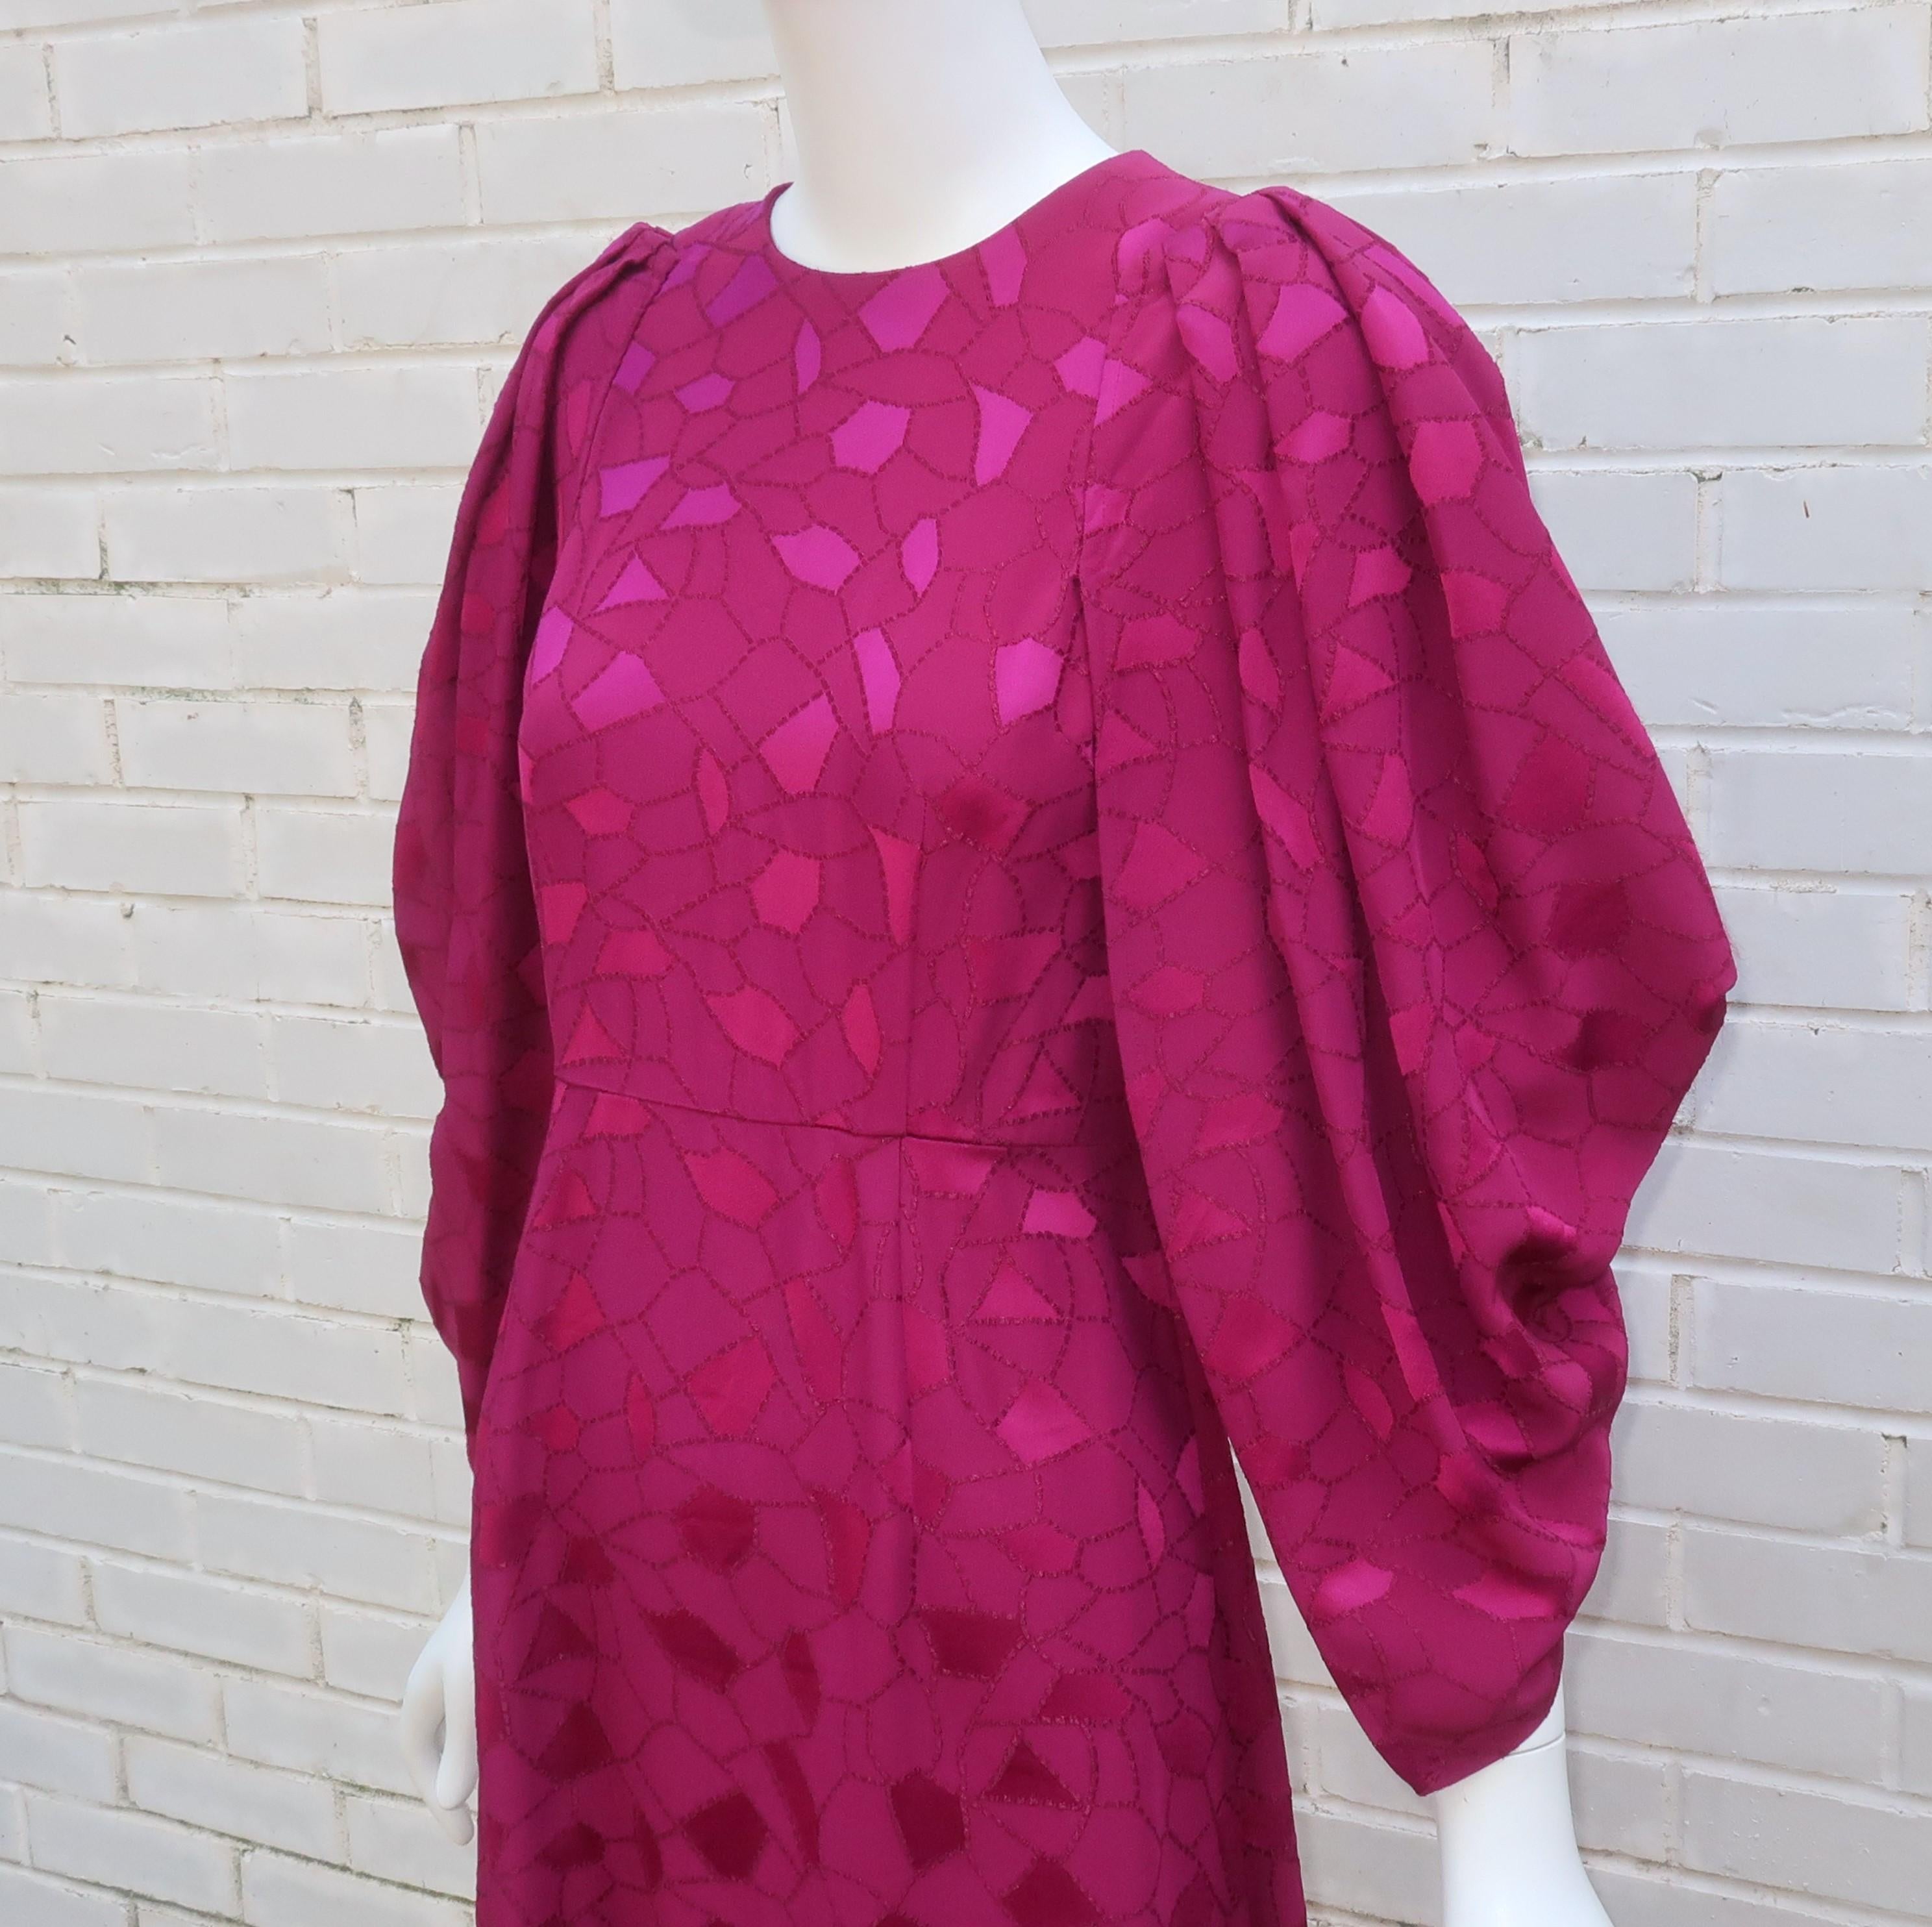 CO Cocoon Sleeve Magenta Dress, 2018 For Sale 1